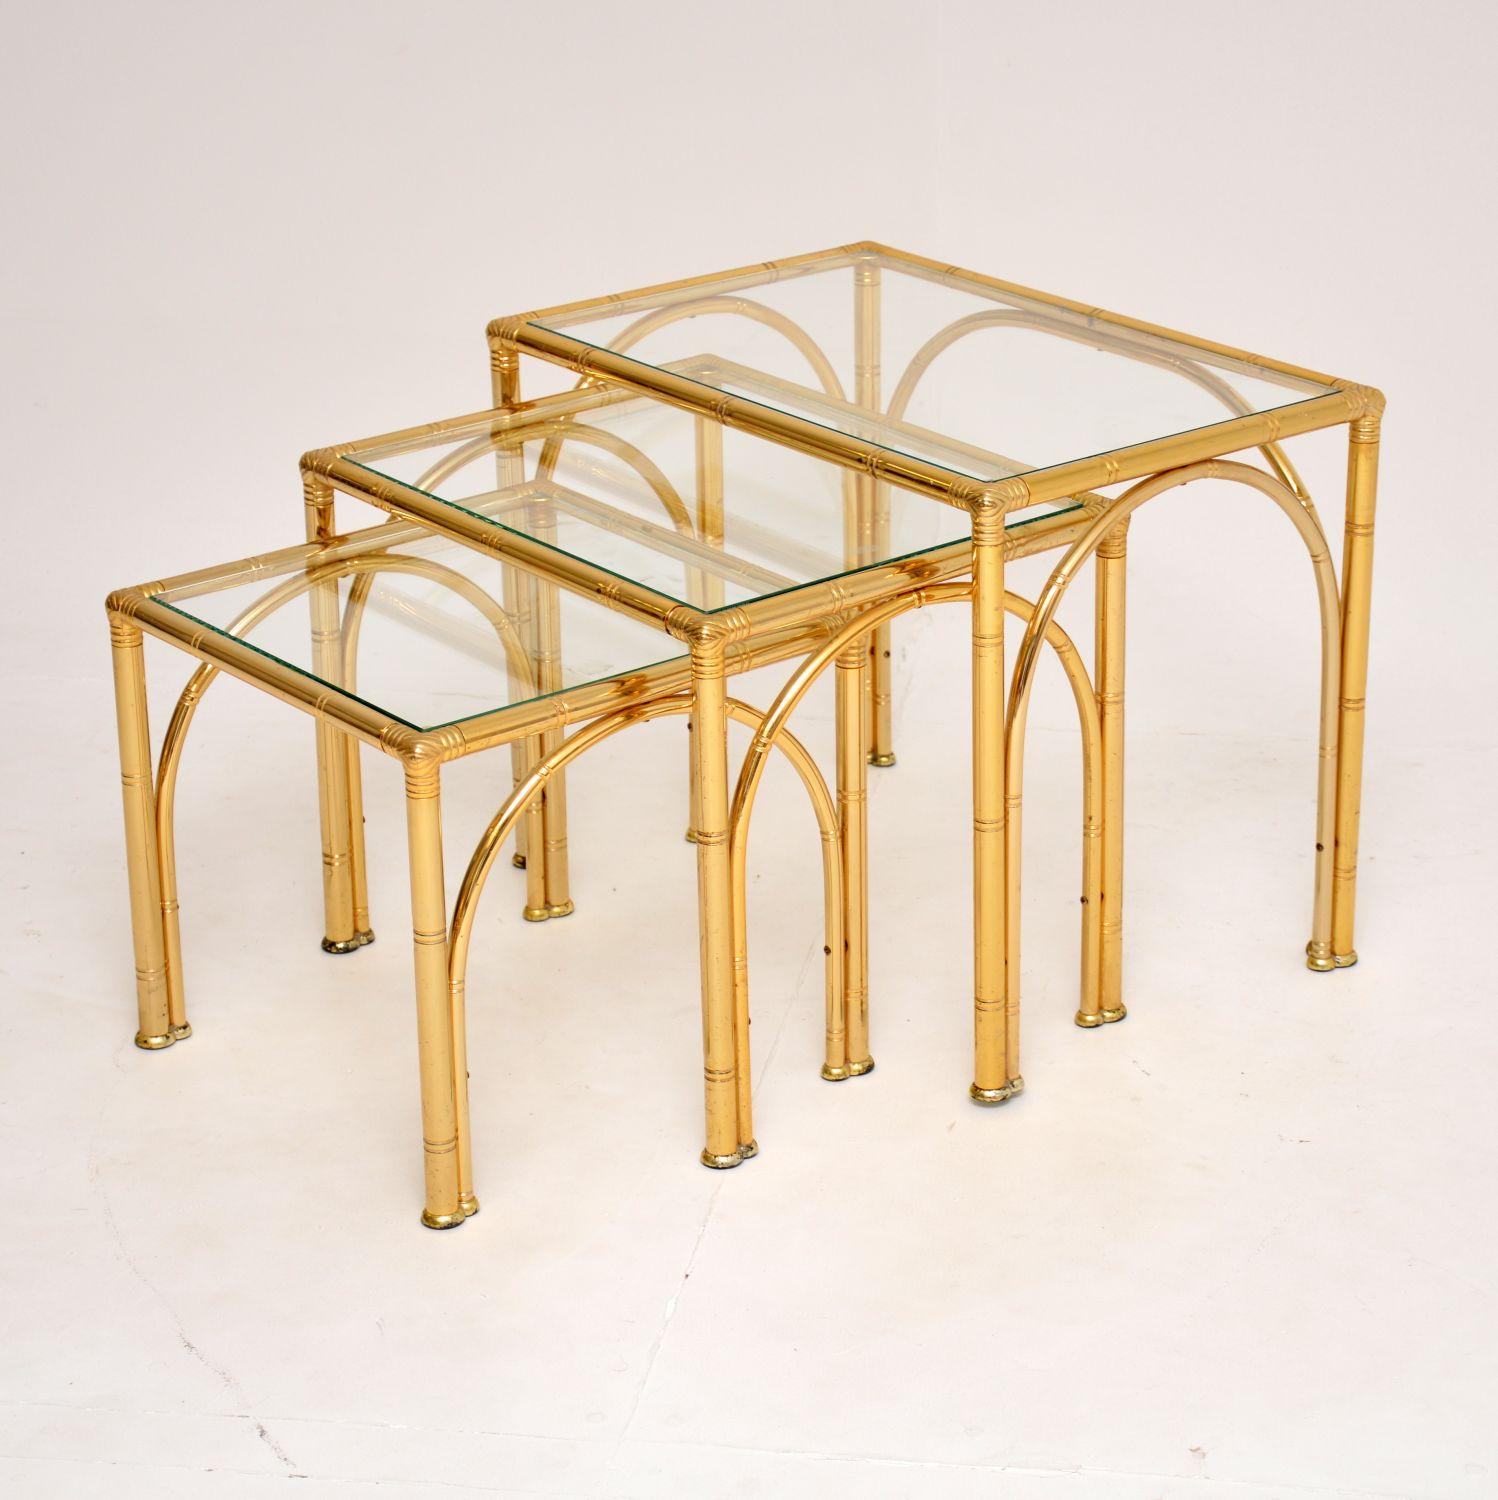 A stunning vintage brass nest of tables in the Hollywood regency style. These were made in England, they date from around the 1970’s.

The quality is excellent, these are beautifully designed and very well made.

The brass frames have only some